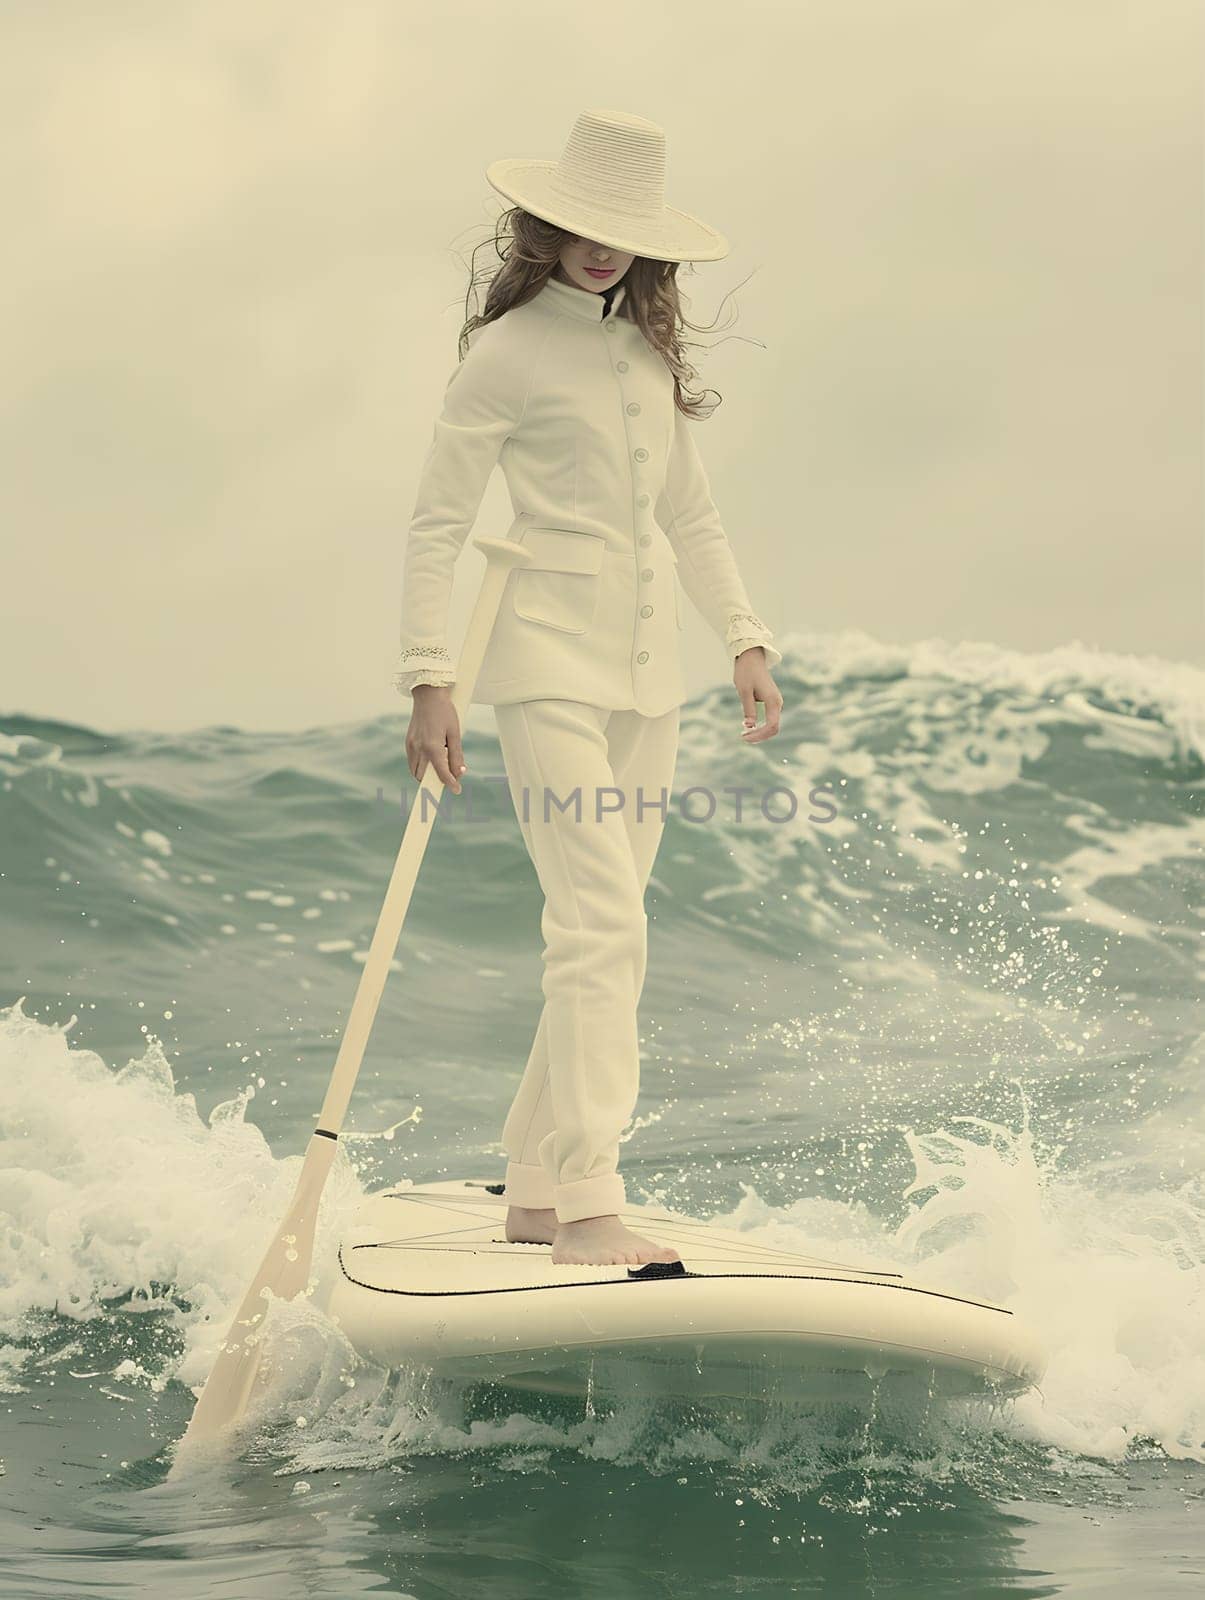 A woman in a white suit gracefully rides a wave on her surfboard in the water by Nadtochiy